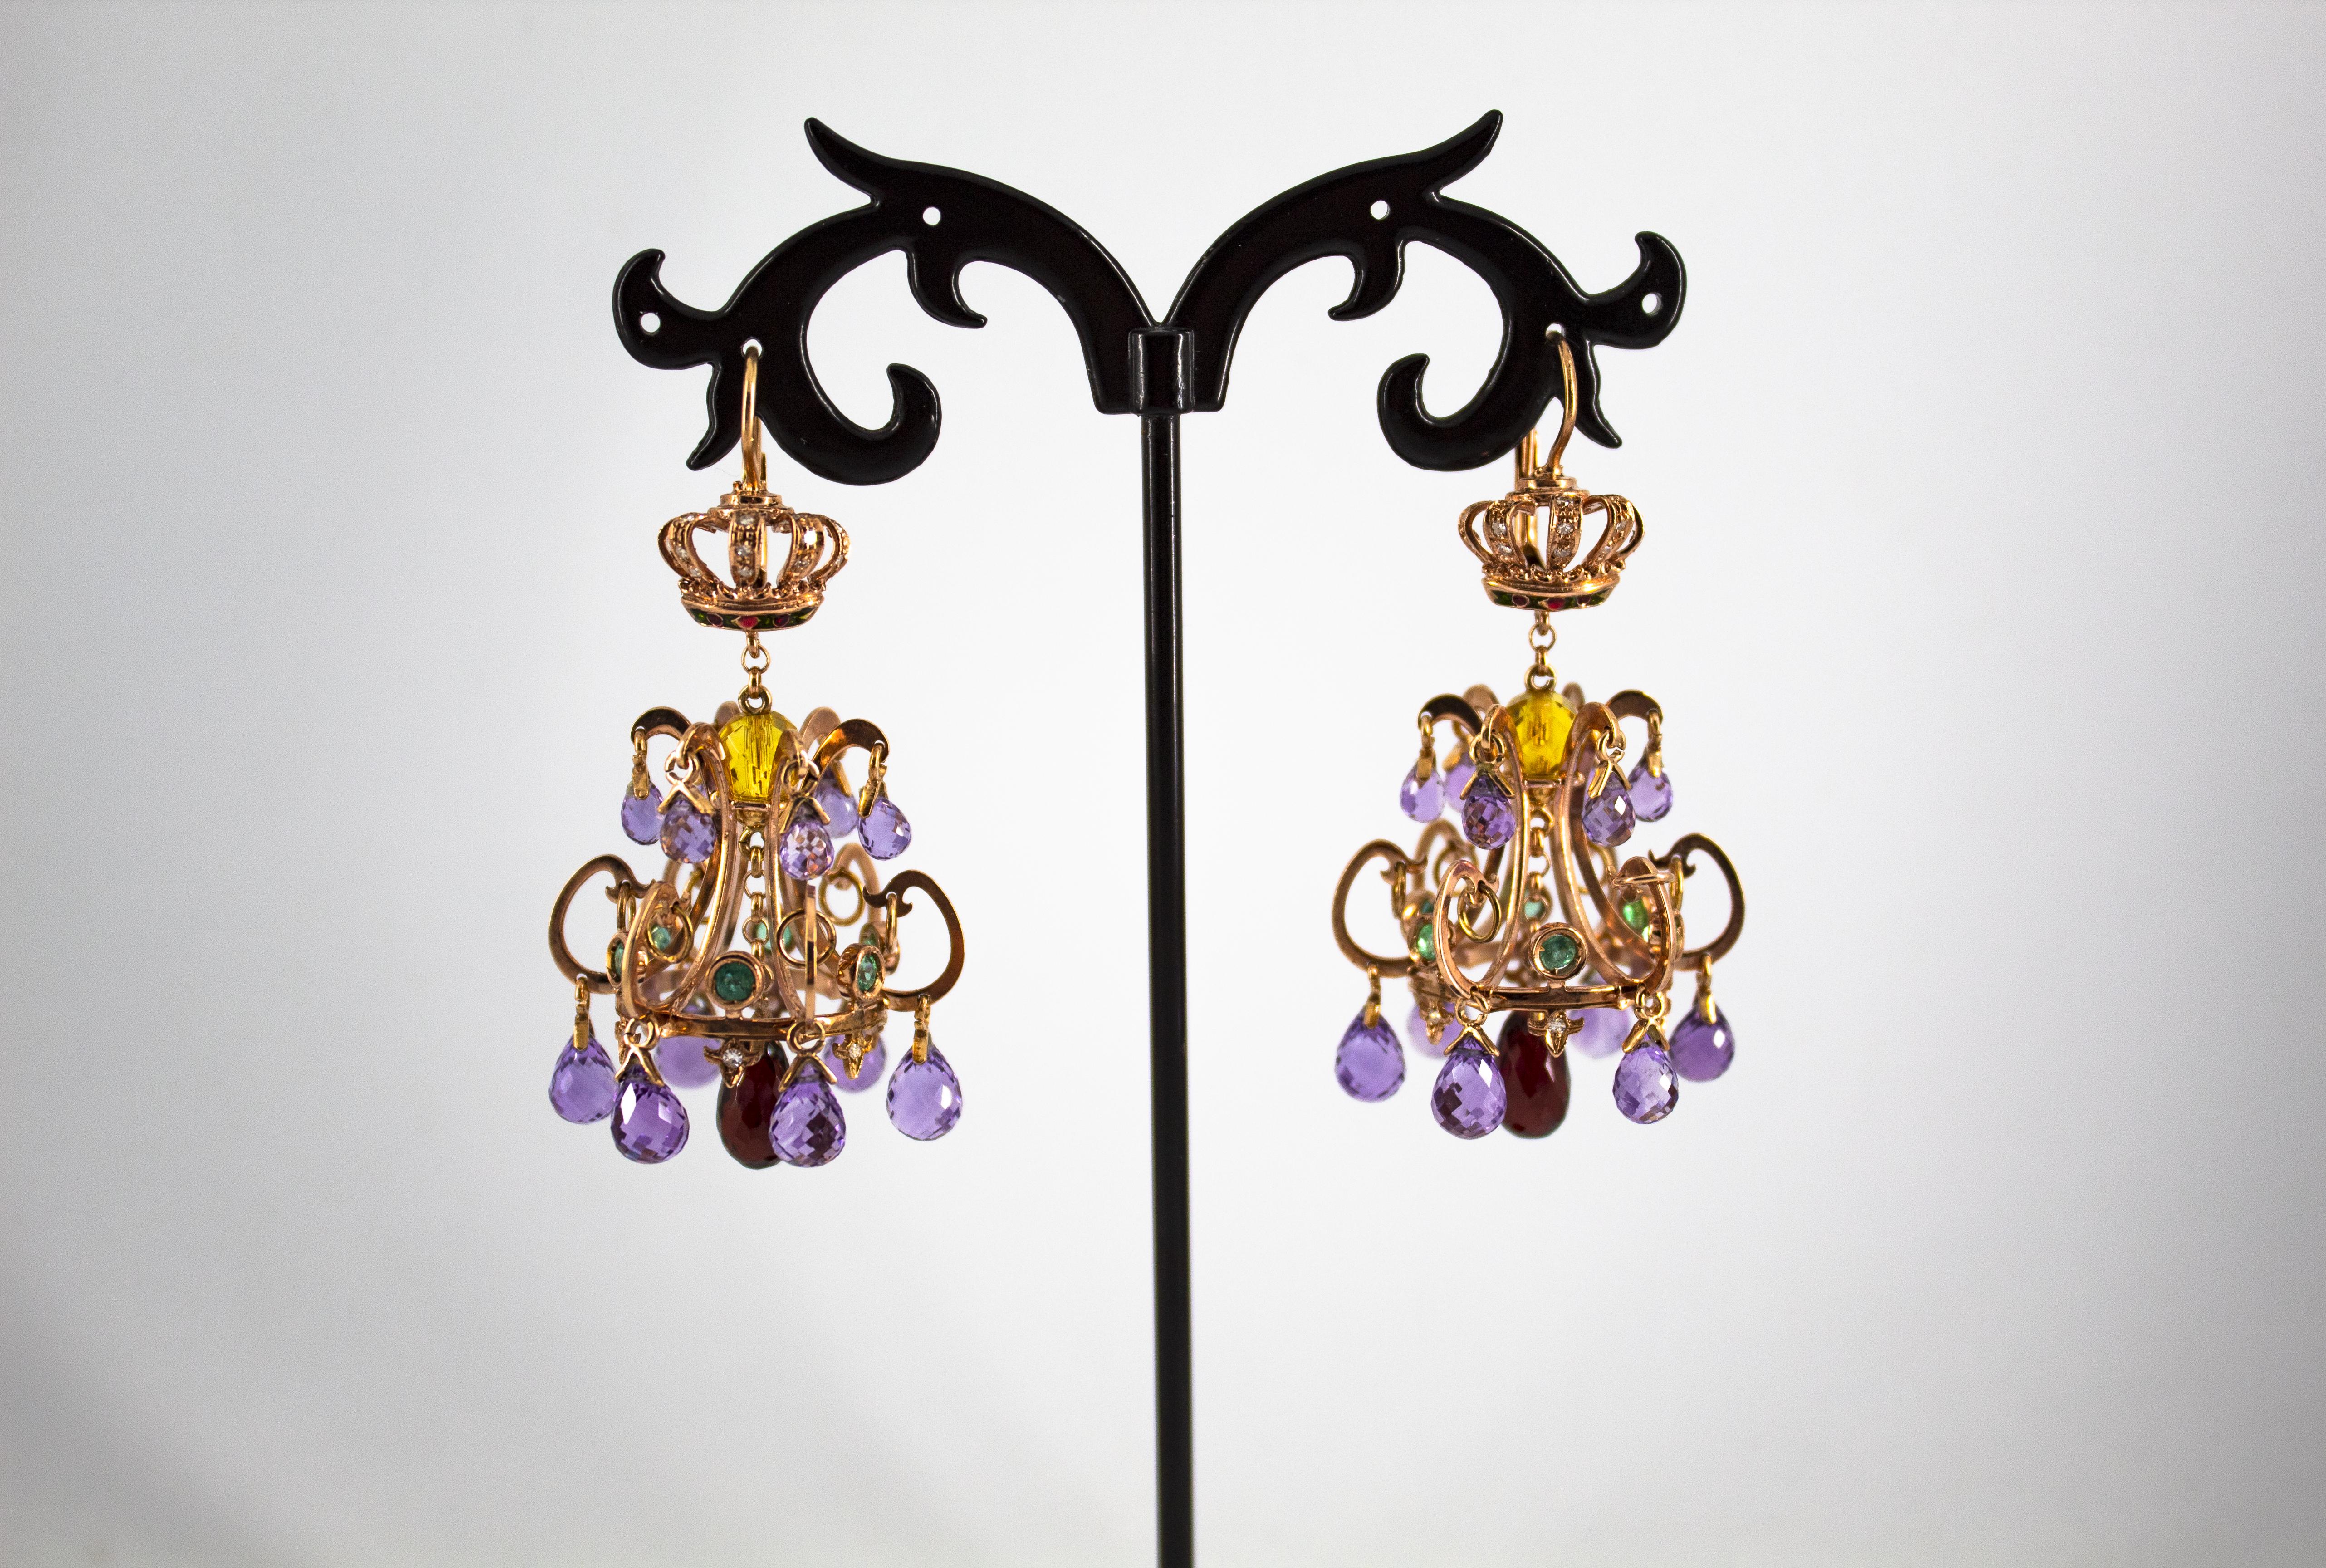 These Lever-Back Earrings are made of 14K Yellow Gold.
These Earrings have 0.25 Carats of White Diamonds.
These Earrings have 0.84 Carats of Emeralds.
These Earrings have 18.00 Carats of Amethysts.
These Earrings have 2.00 Carats of Citrine.
These